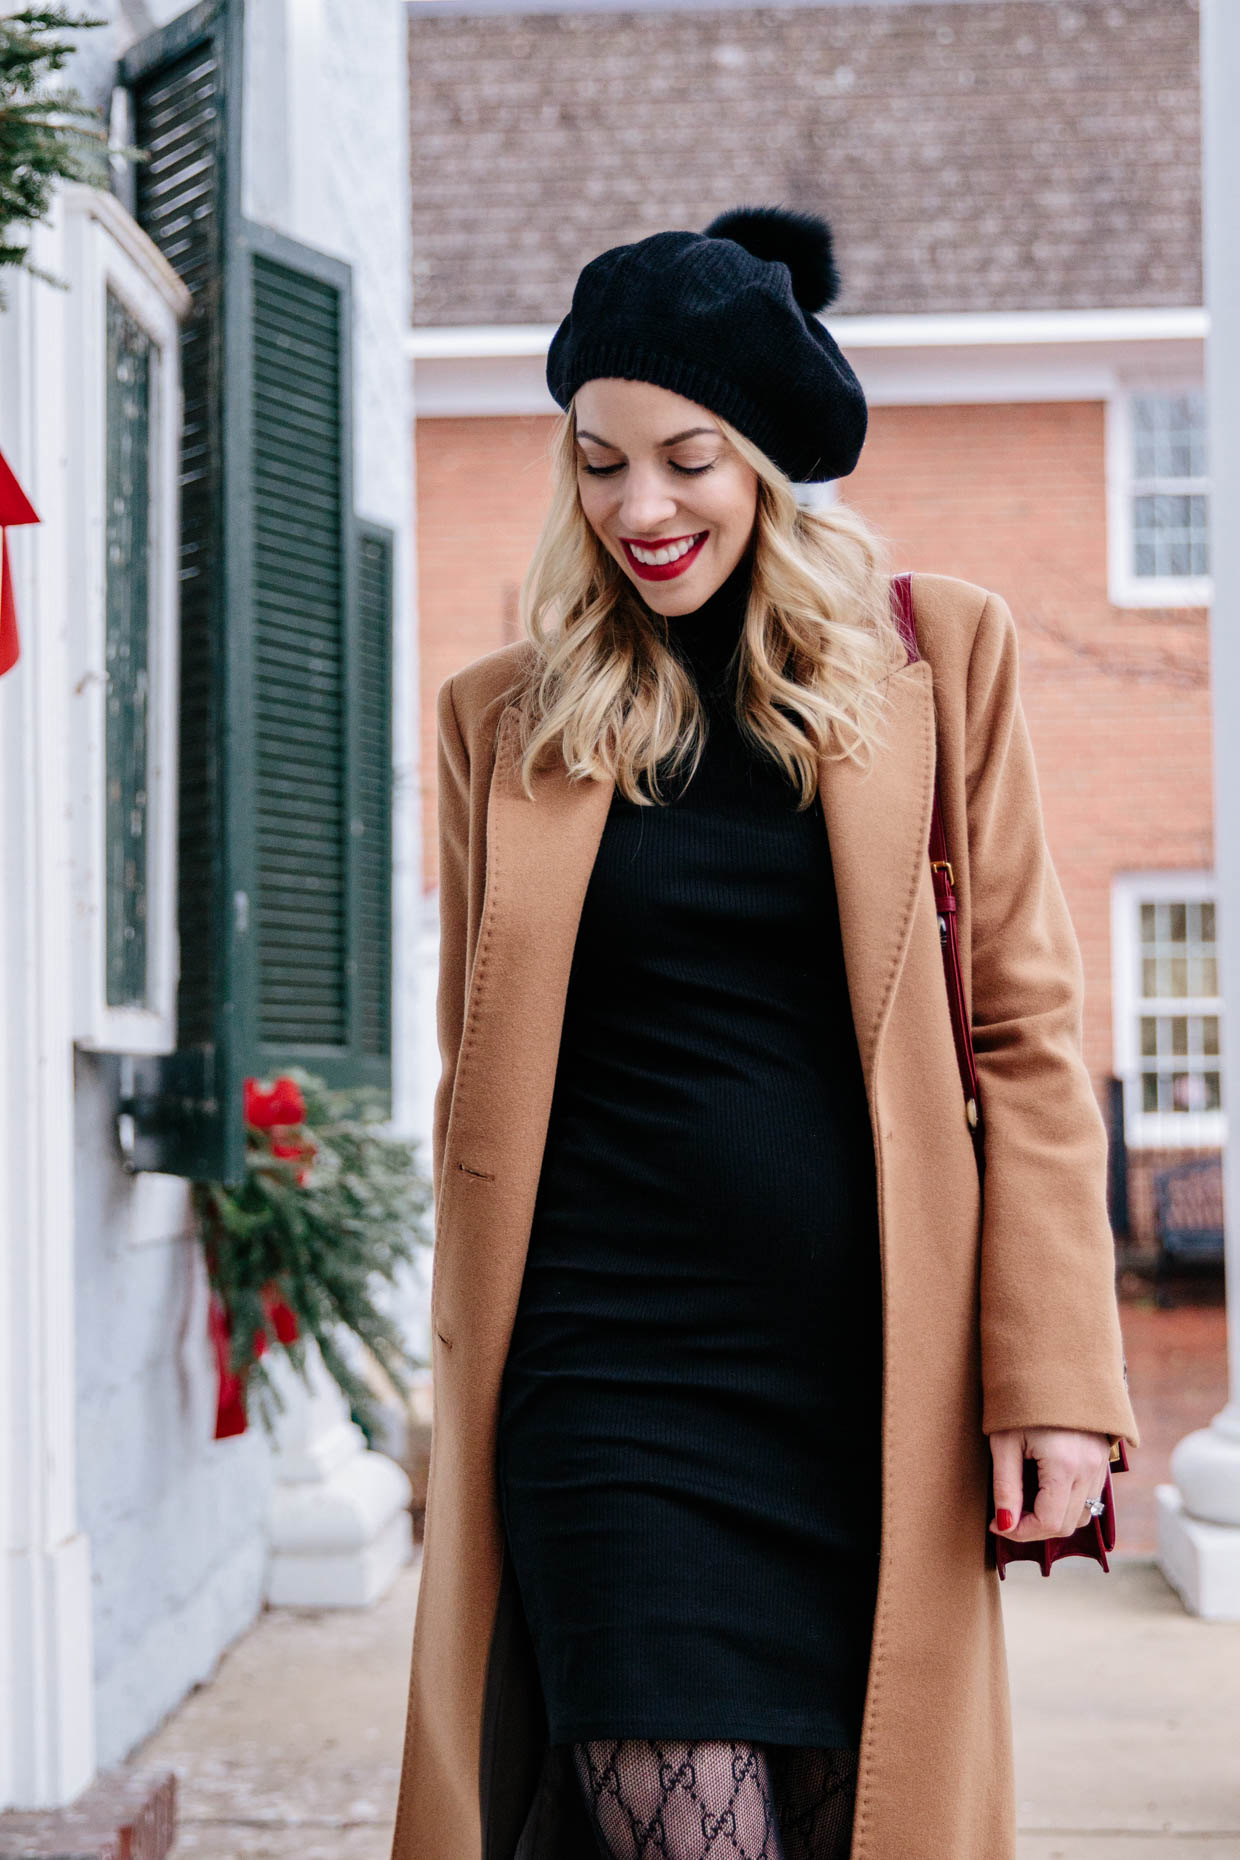 Style Tricks for Hiding a Baby Bump Until You're Ready to Reveal Your  Pregnancy - Meagan's Moda